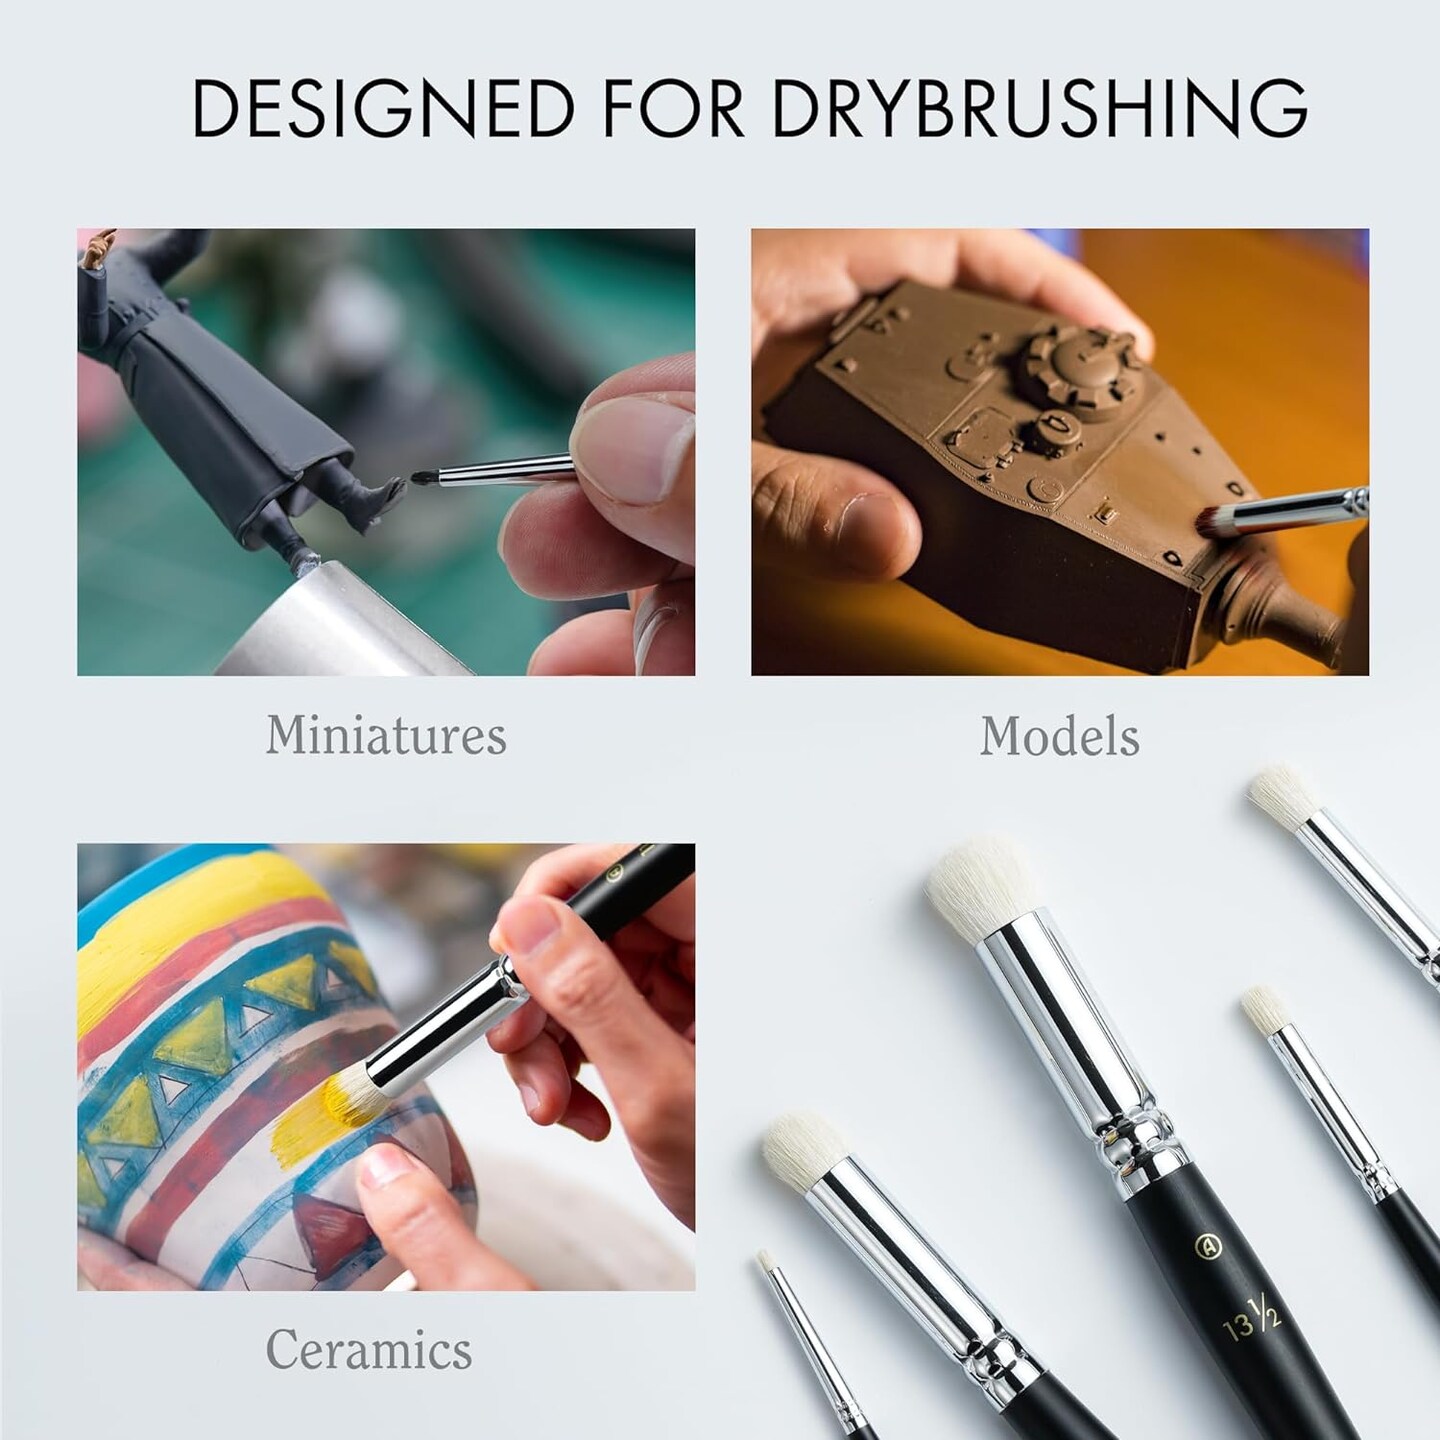 ARTIFY Drybrush Set of 5 Sizes: Expert Series Dry Brush for Effortless Miniature, Model, Ceramics, Citadel Painting - Hobby Detail Small Acrylic Oil Paint Brushes for Tabletop &#x26; Wargames Miniatures